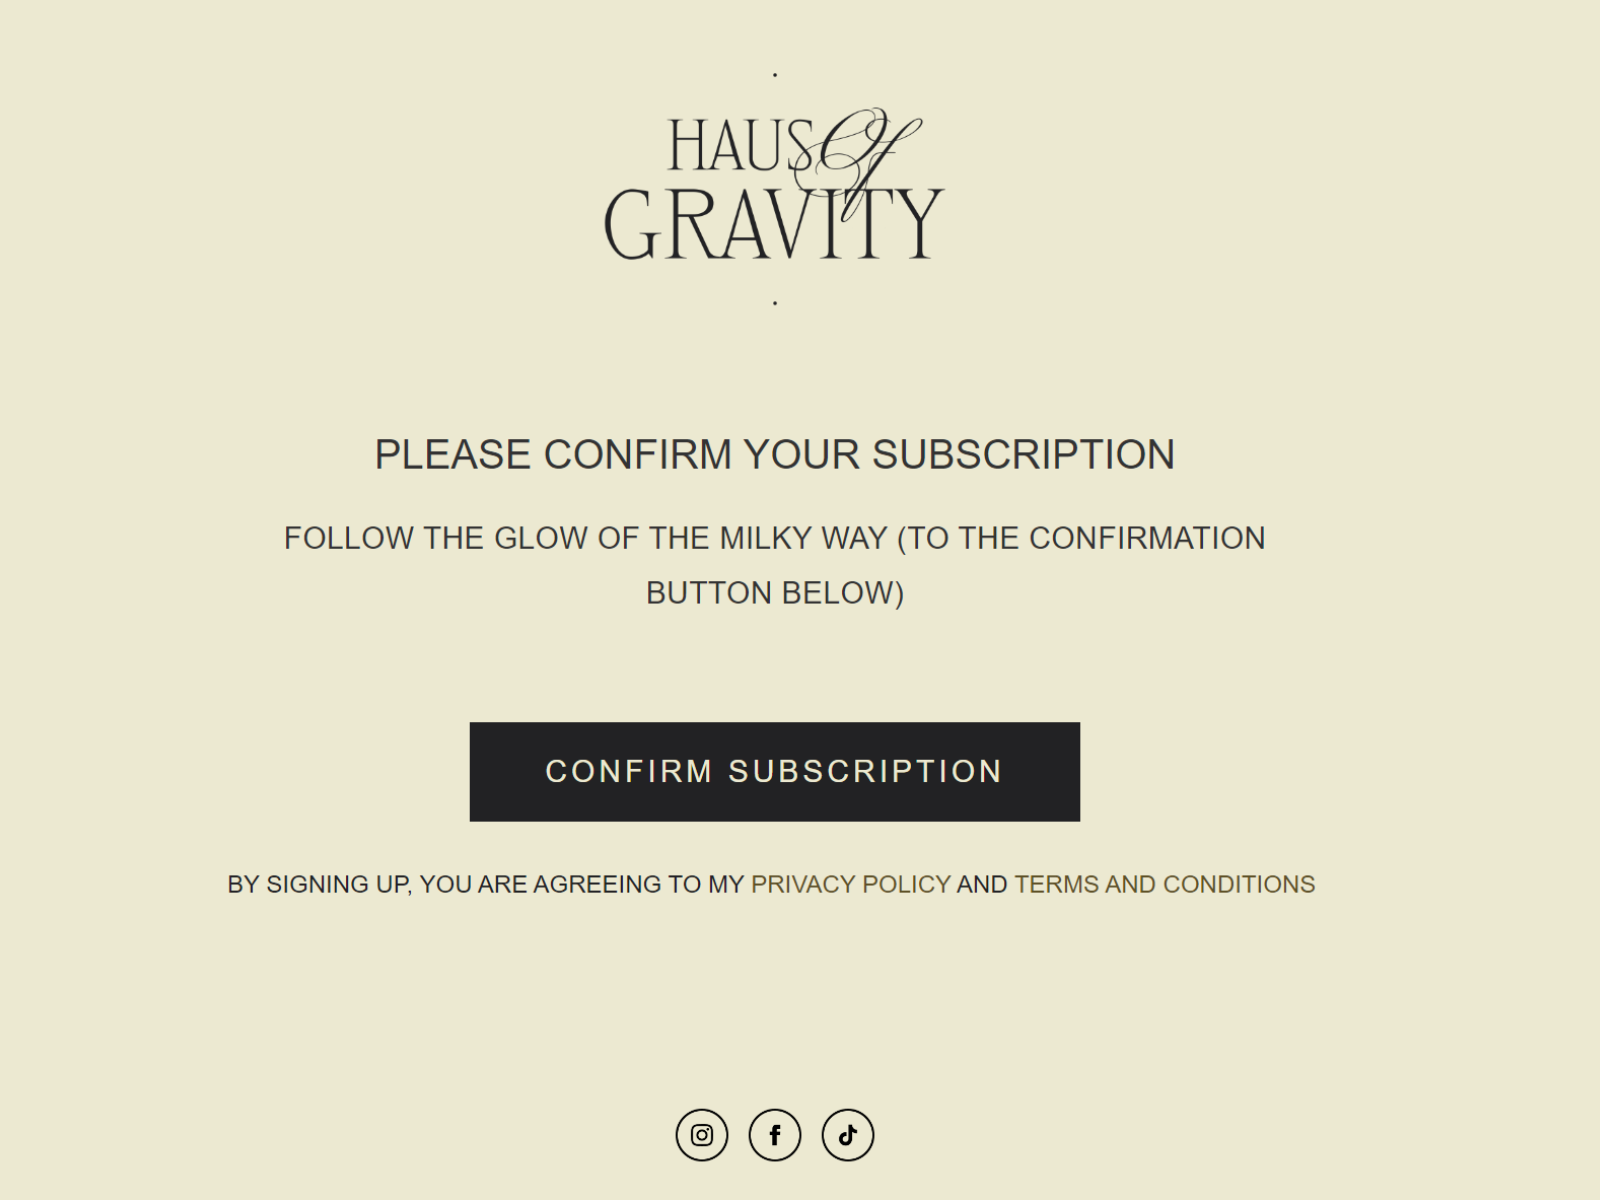 Haus of Gravity Contact Page